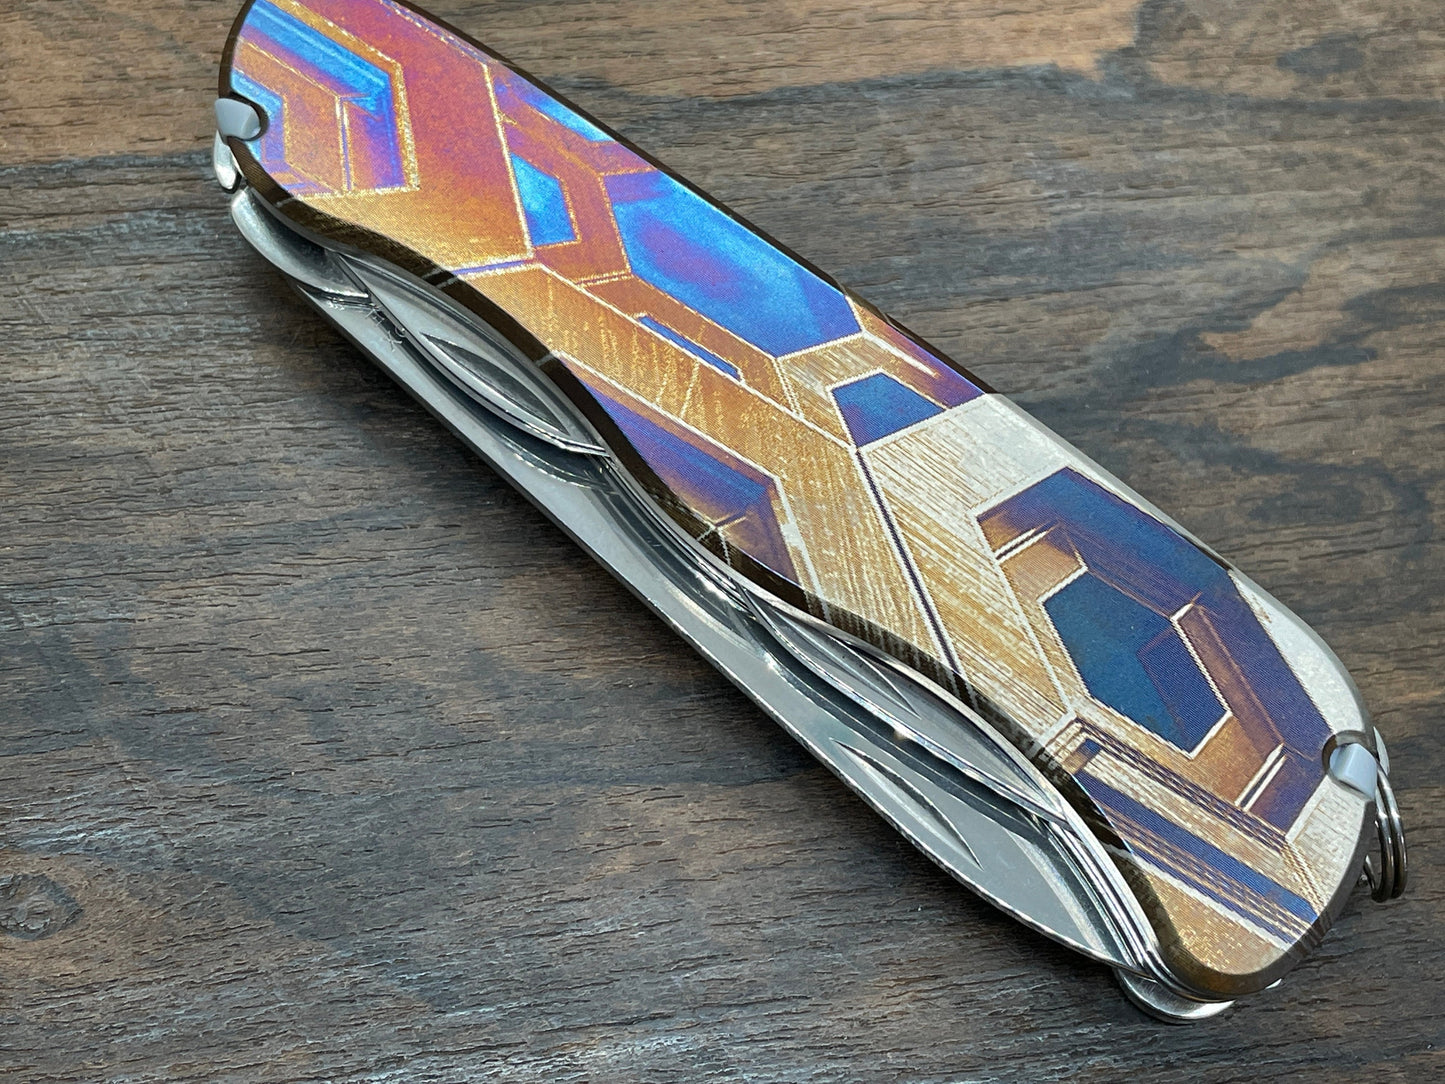 111mm FALCON heat ano engraved Titanium Scales for Swiss Army SAK